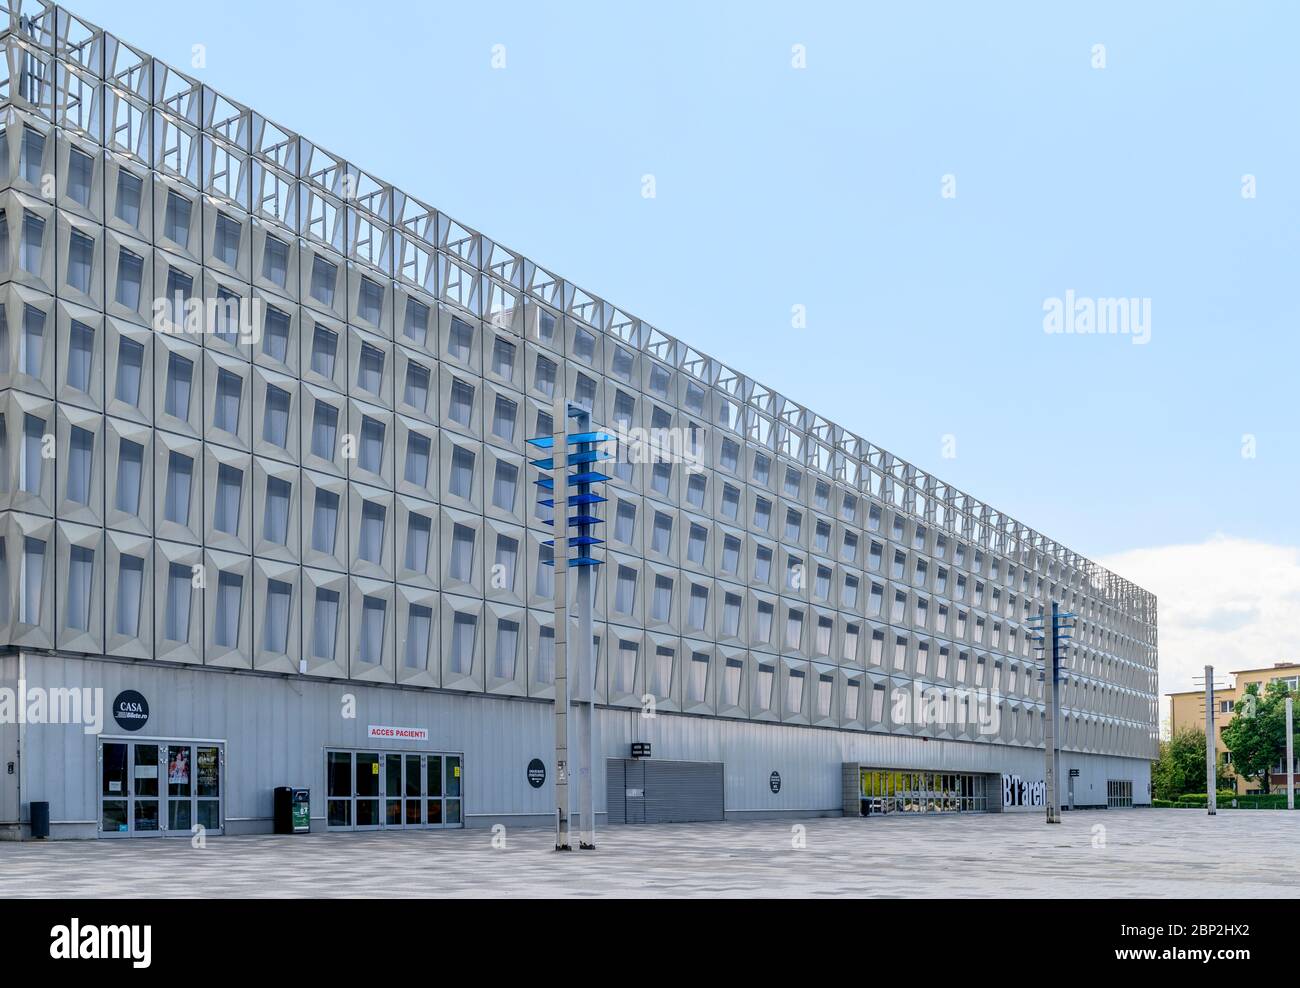 Cluj-Napoca, Romania - 9 May 2020: The Multipurpose or Polyvalent Hall also called BT Arena where sports events like the Fed Cup or Music Festivals li Stock Photo